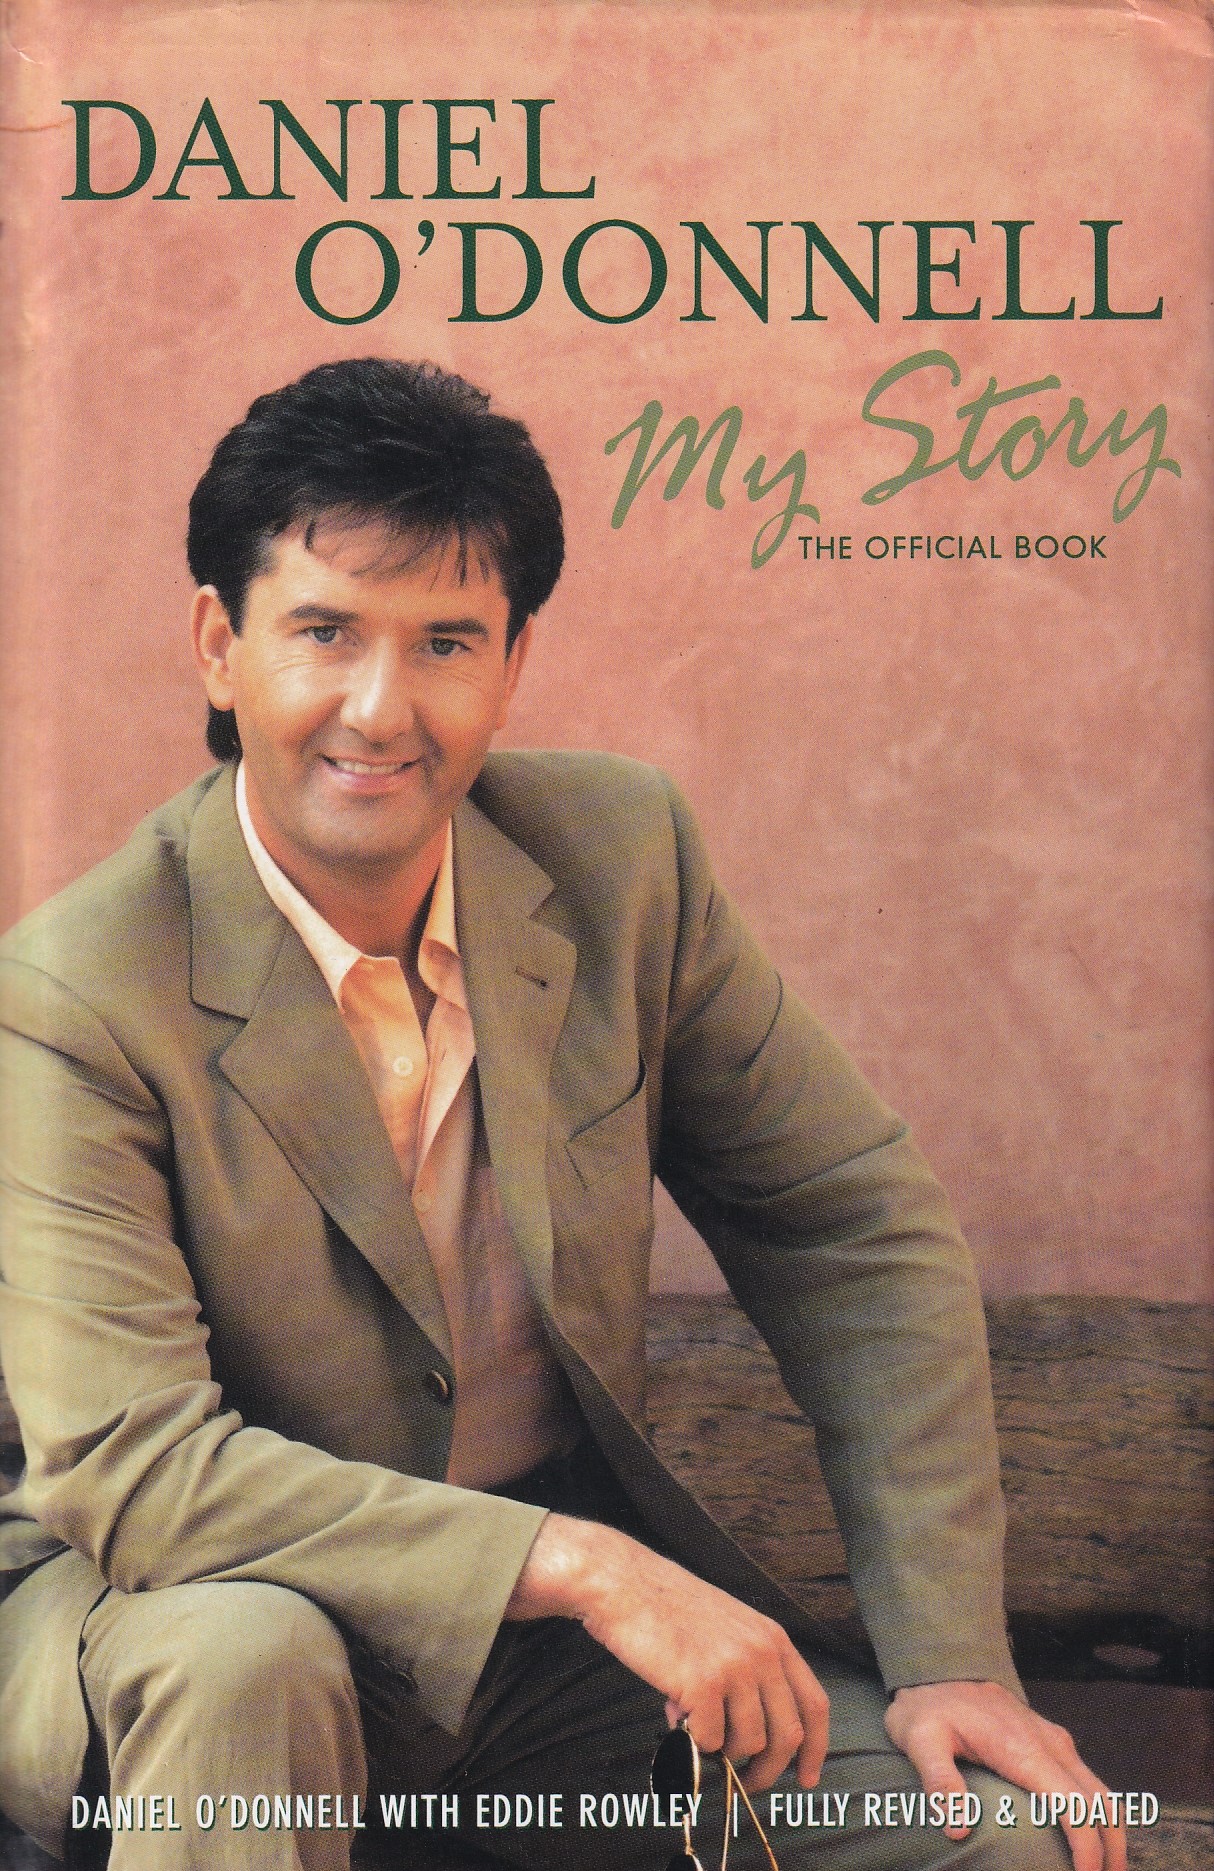 Daniel O’Donnell: My Story by Daniel O'Donnell